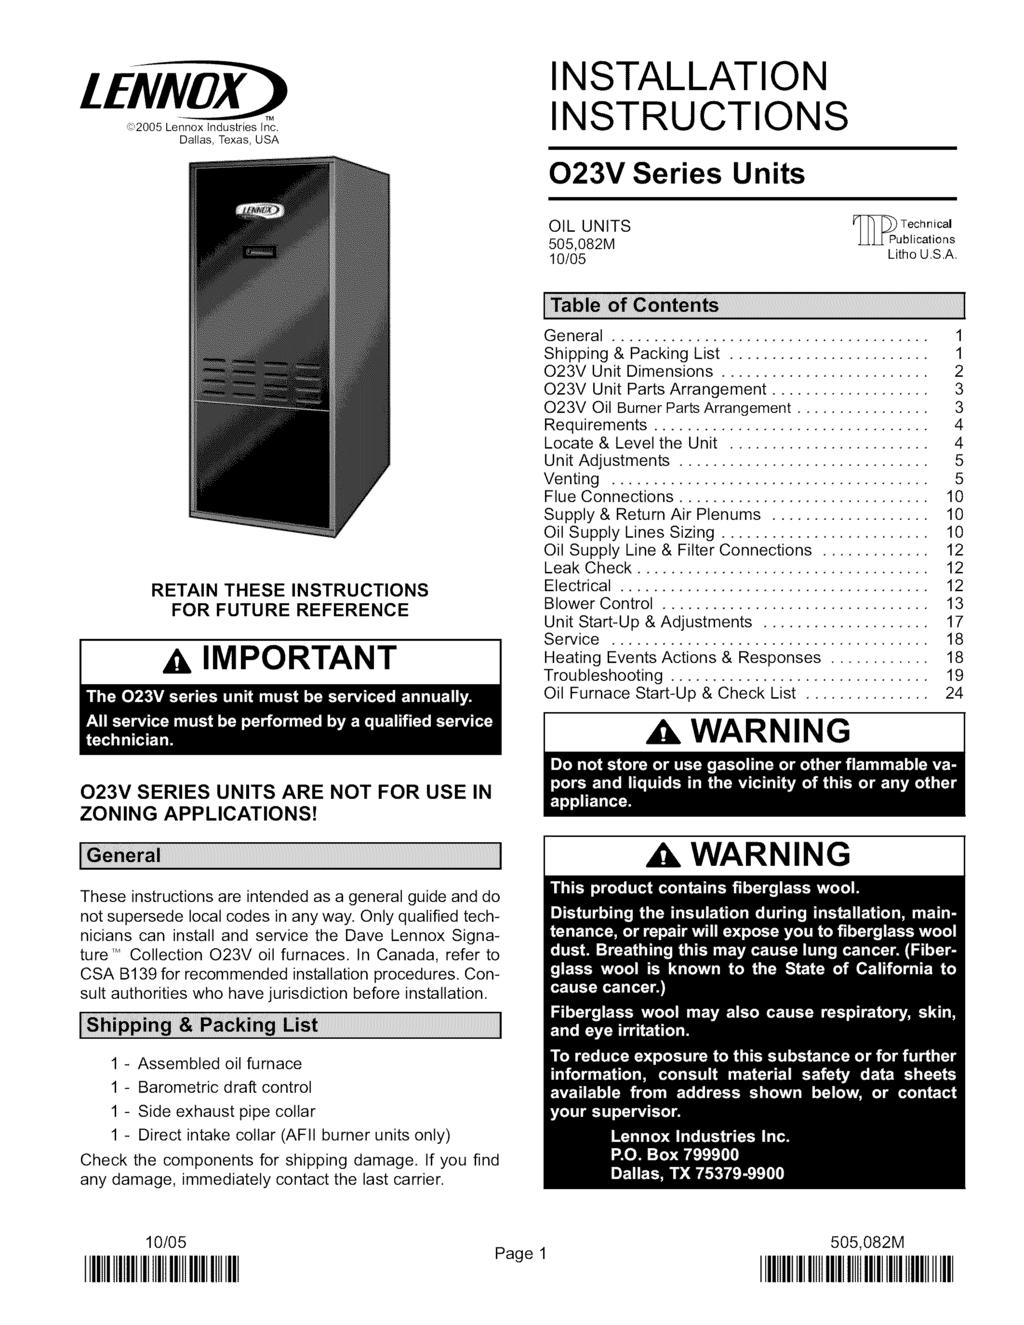 ,t_2005 Lennox industries Inc, Dallas, Texas, USA INSTALLATION INSTRUCTIONS O23V Series Units OIL UNITS _ Technical 505,082M LL.L[ Publications 10/05 Litho U.S.A. RETAIN THESE INSTRUCTIONS FOR FUTURE REFERENCE A IMPORTANT General.